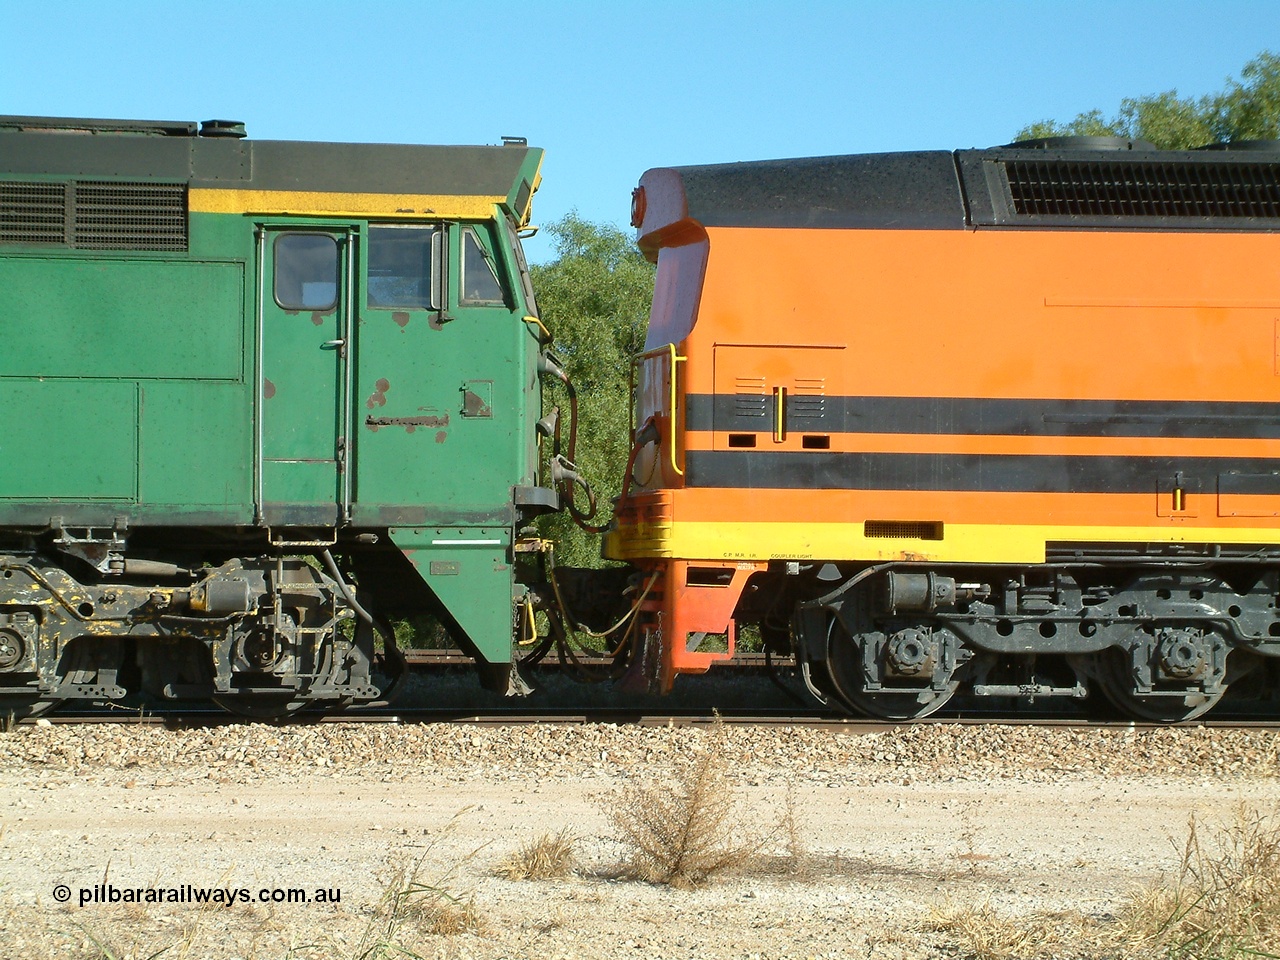 030403 154207
Gladstone, MKA (Morrison Knudsen Australia) rebuilt AL class AL 23 into EMD JT26C-2M model for Australian National in 1993 as the ALF class, here ALF 22 serial 94-AB-022 shows the blanked off No.2 end cab as it is coupled to an A E Goodwin built ALCo 700 class on the 3rd April 2003.
Keywords: ALF-class;ALF22;MKA;EMD;JT26C-2M;94-AN-022;rebuild;AL-class;AL23;Clyde-Engineering;EMD;JT26C;76-839;